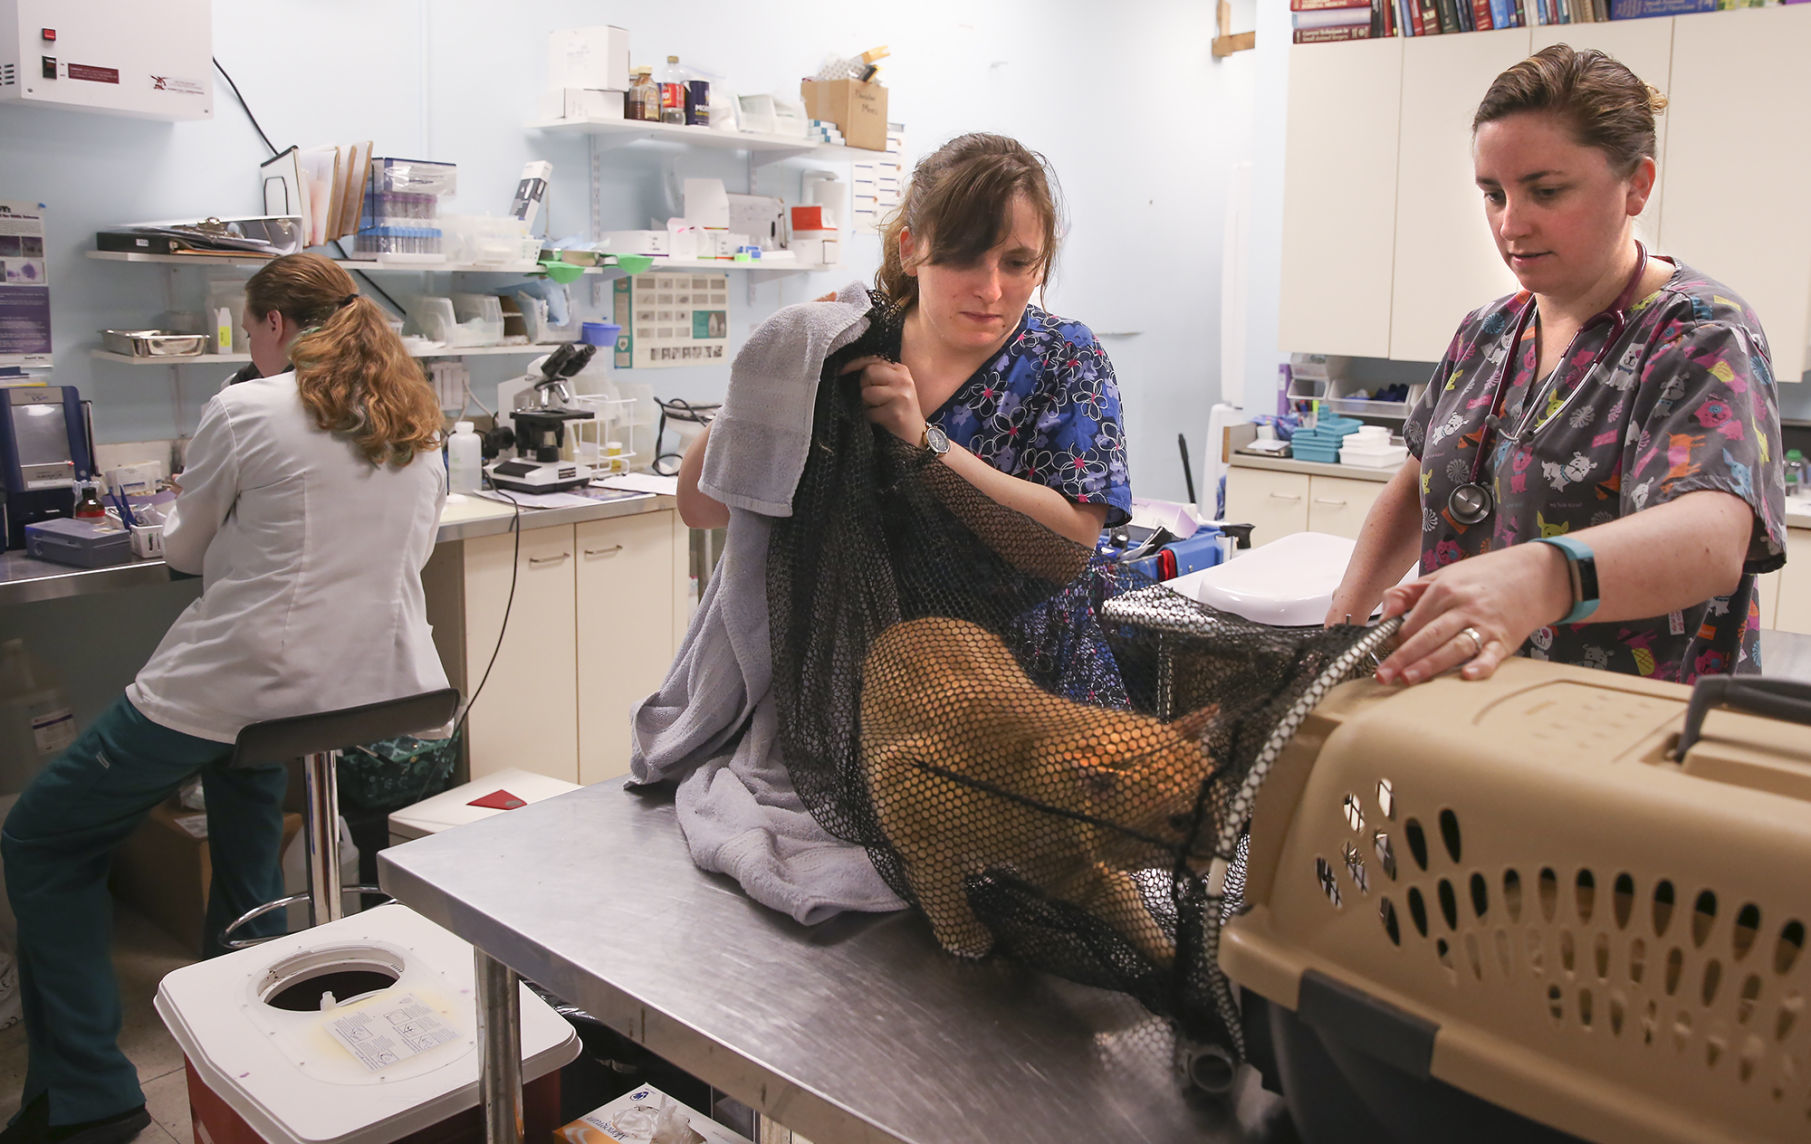 vet care for low income families